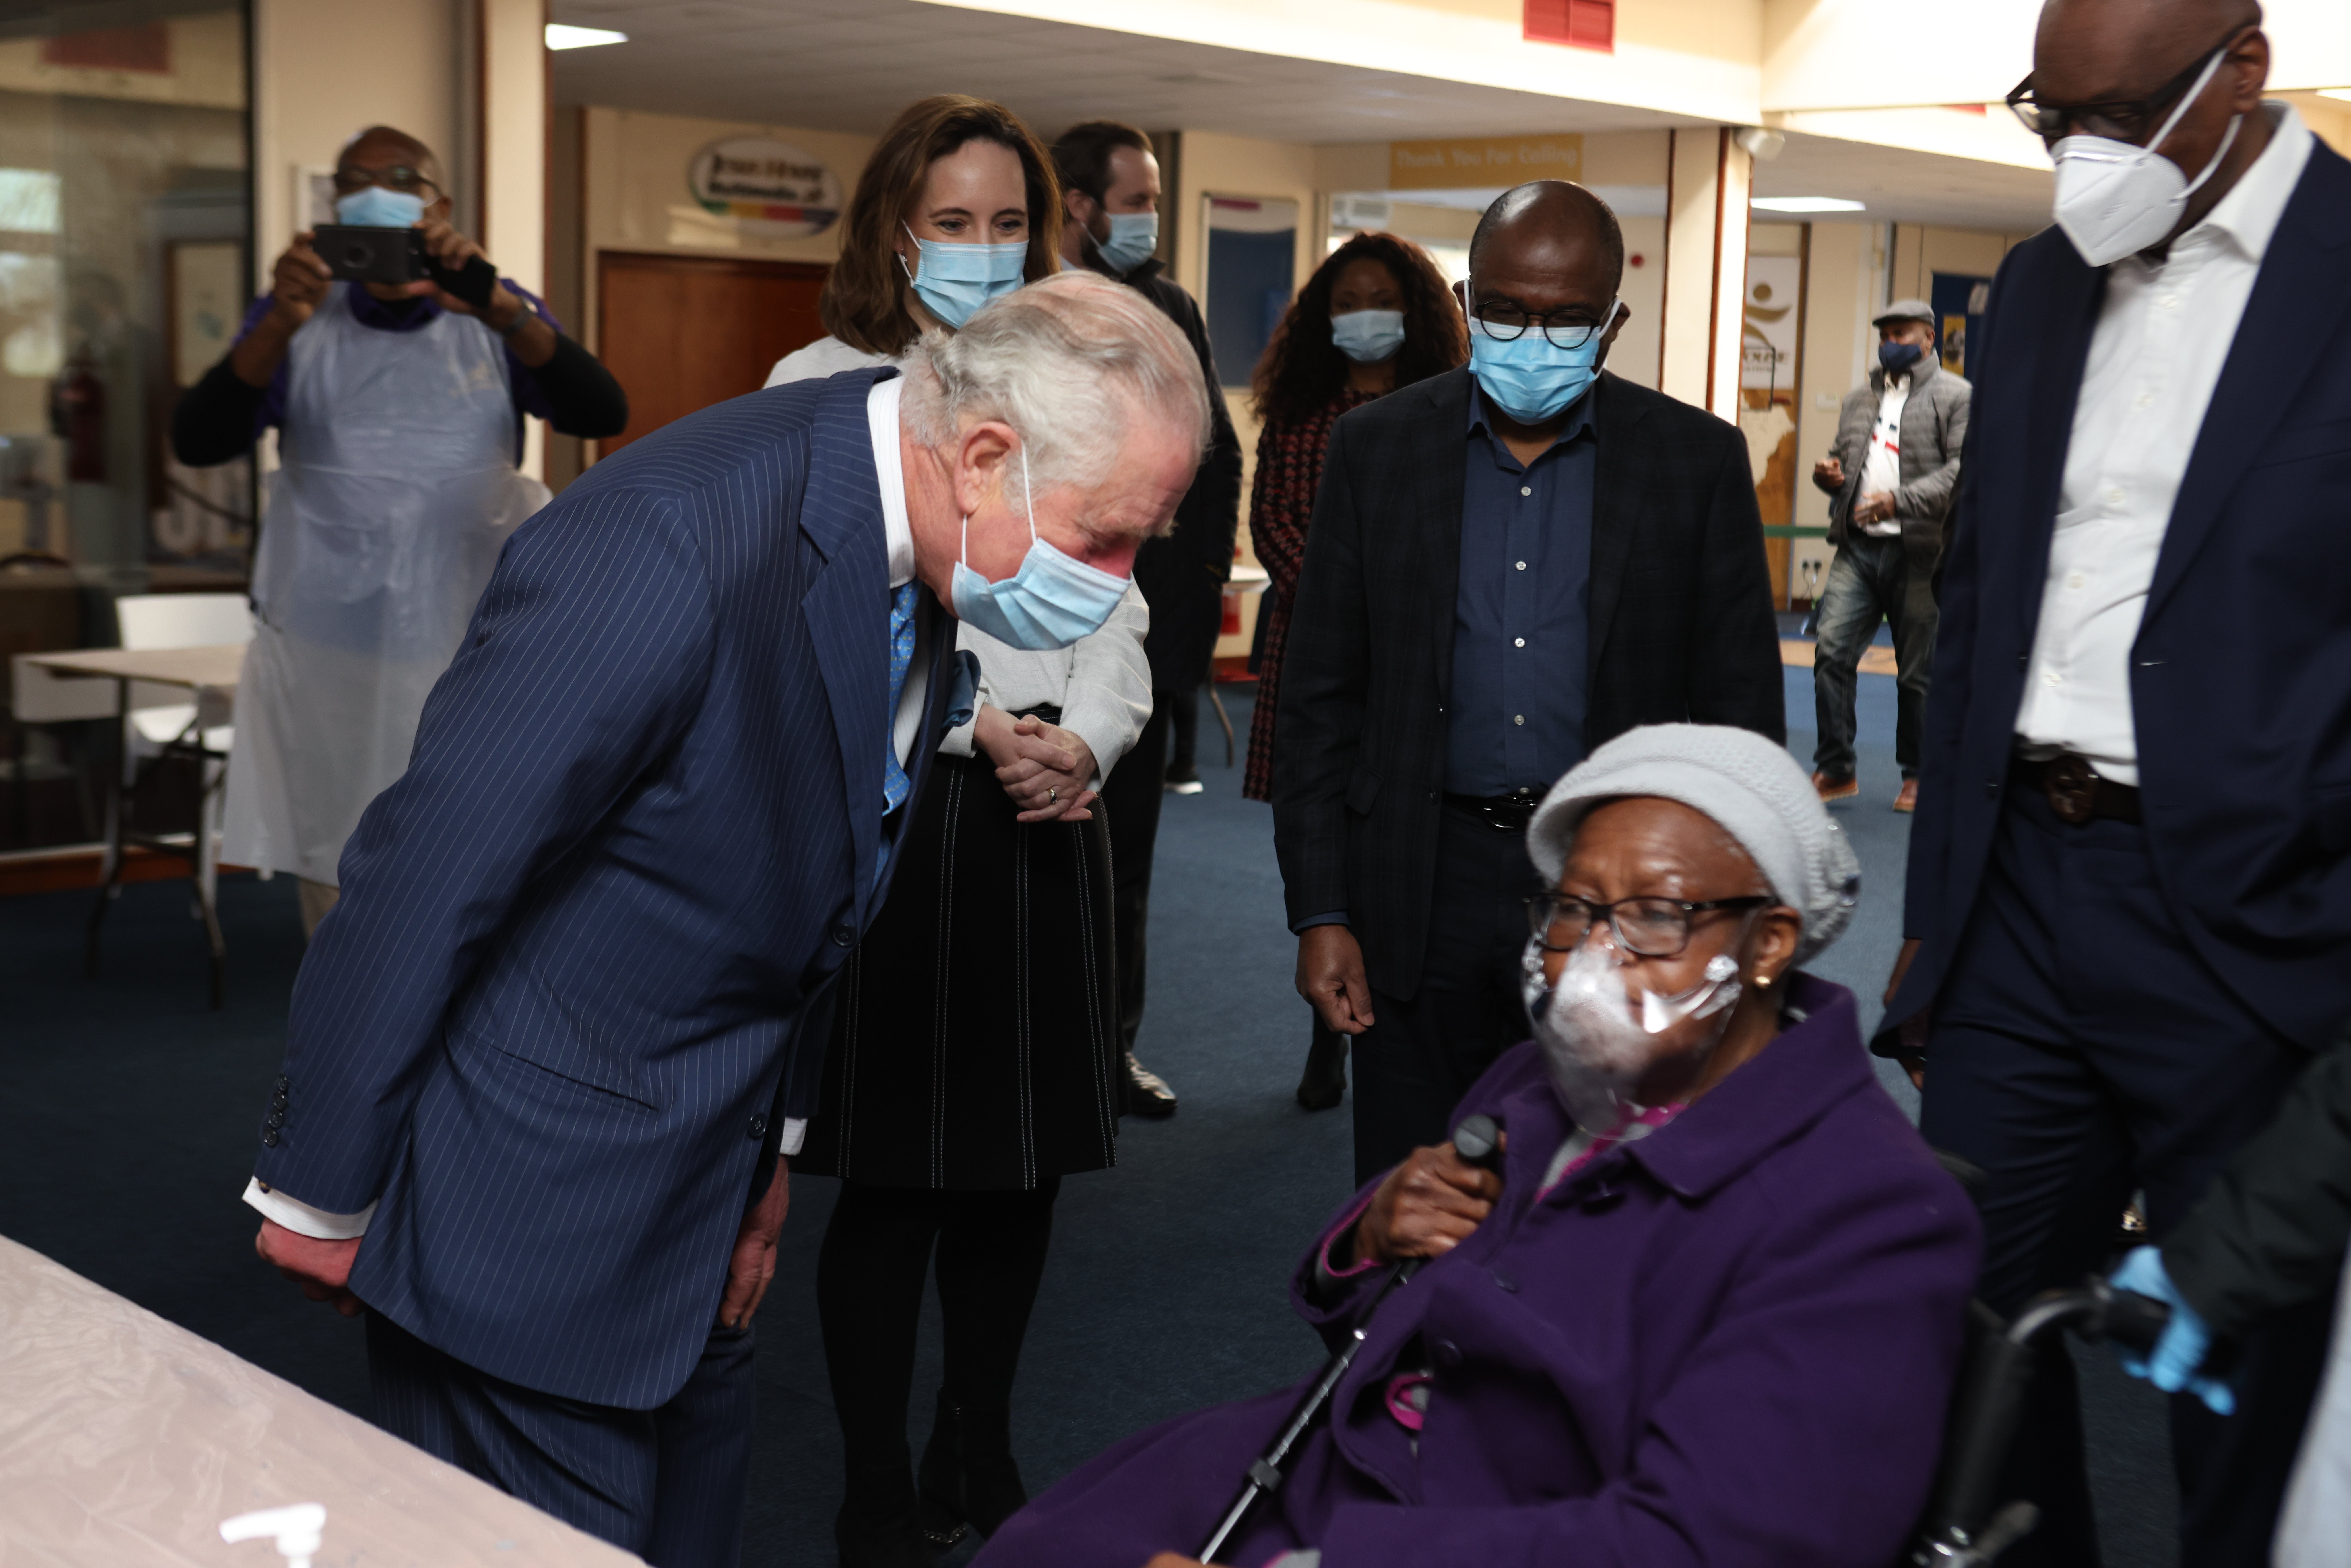 LONDON, ENGLAND - MARCH 09: Prince Charles, Prince of Wales visits Jesus House church to see an NHS vaccine pop-up clinic in action on March 9, 2021 in London, England. The Prince was shown round by Pastor Agu Irukwu and learnt about community work to com (Foto: Getty Images)